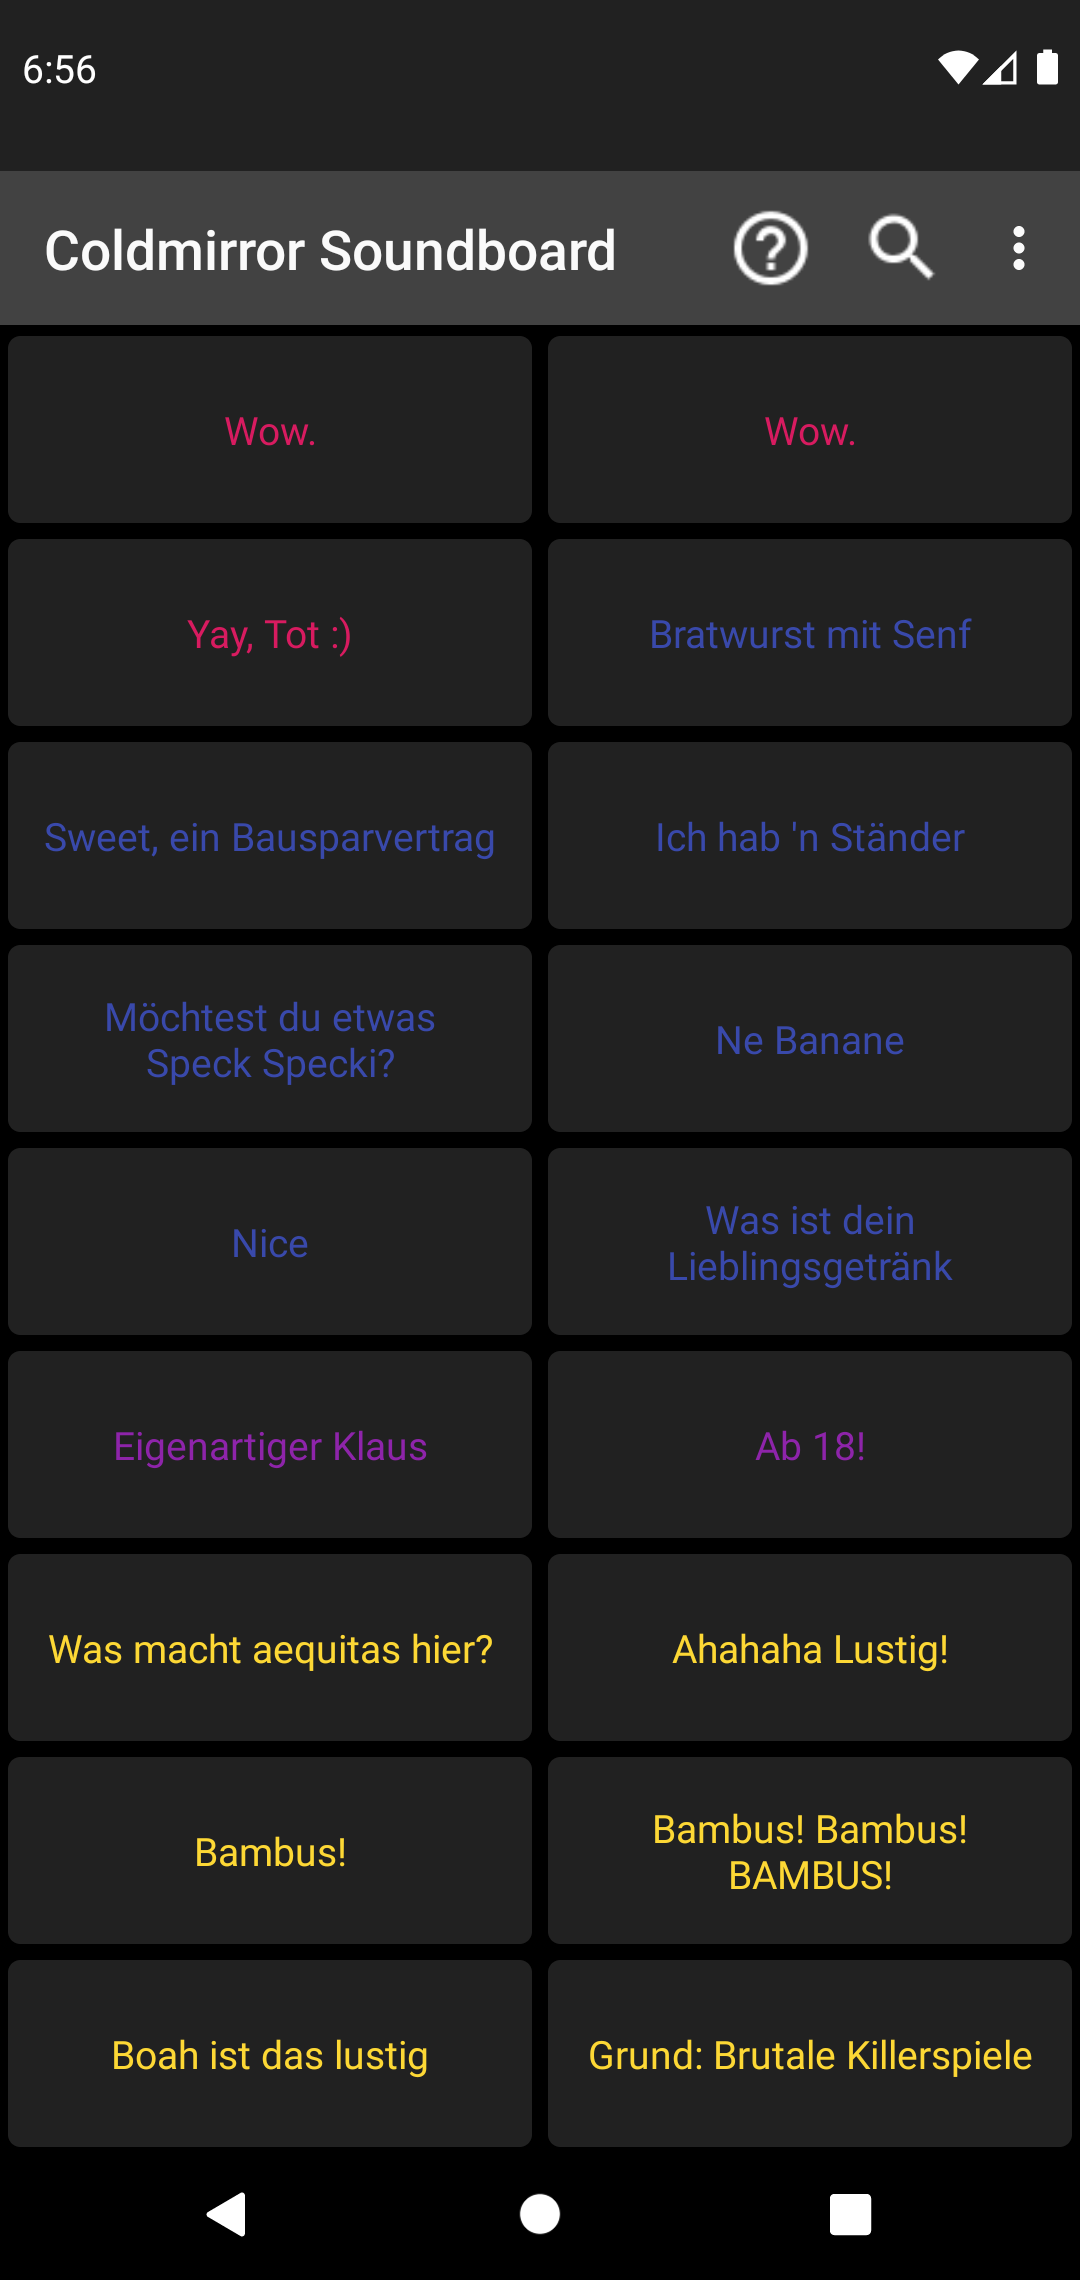 GitHub - AhiruSoftwareCompany/coldmirrorapp: A soundboard app with quotes  and effects from coldmirror (German r)